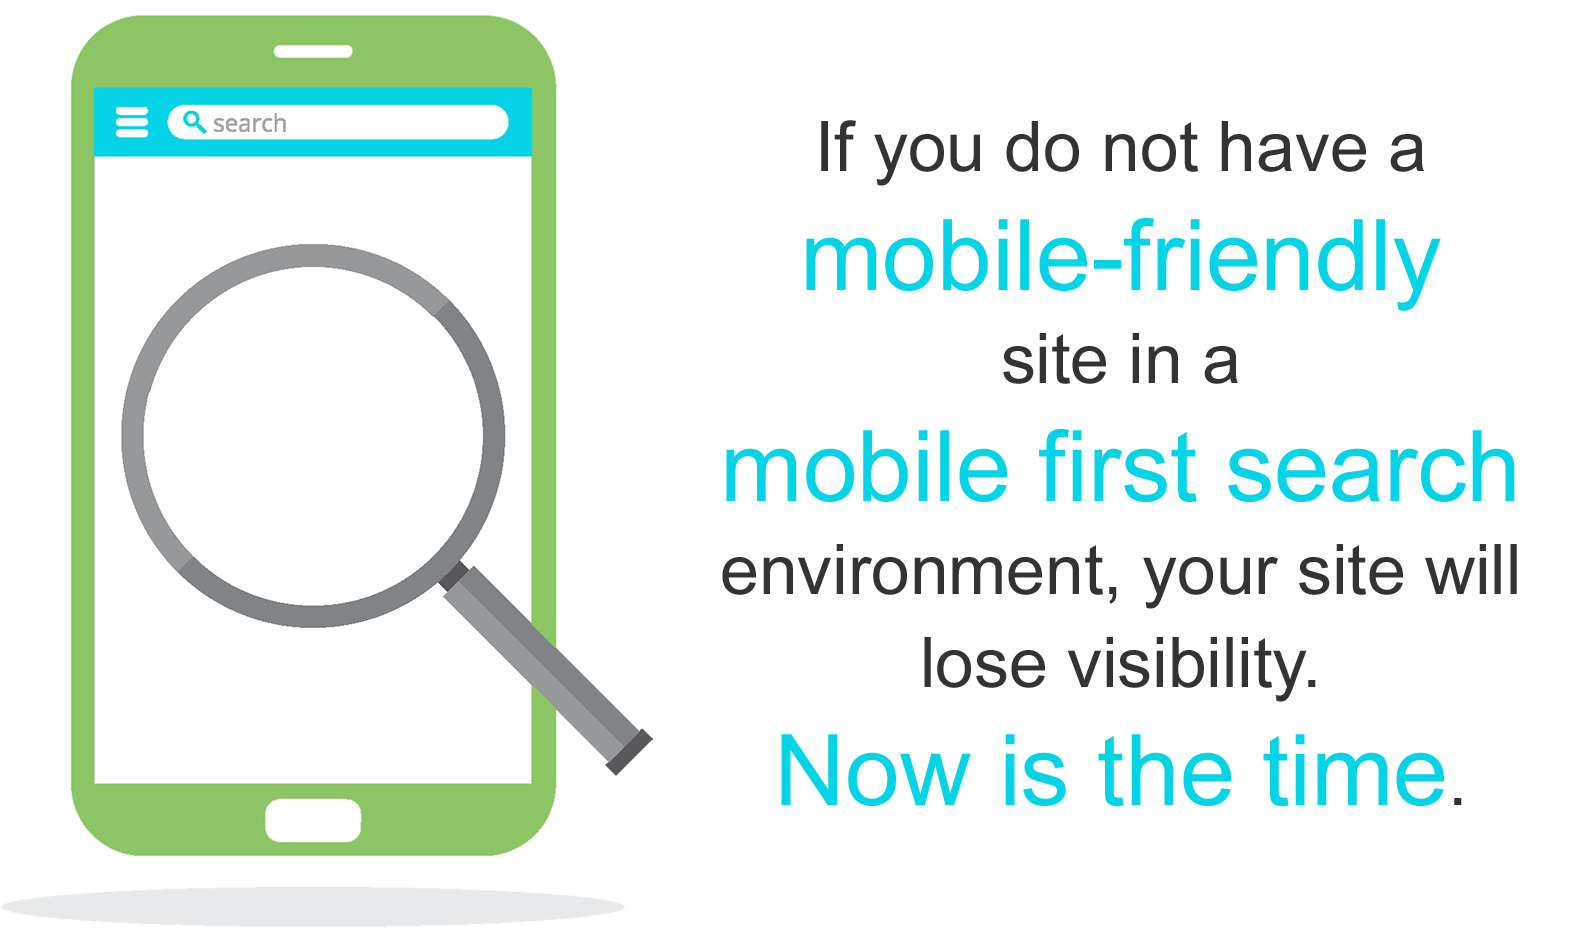 If you do not have a mobile-friendly site in a mobile first search environment, your site will lose visibility. Again, now is the time.